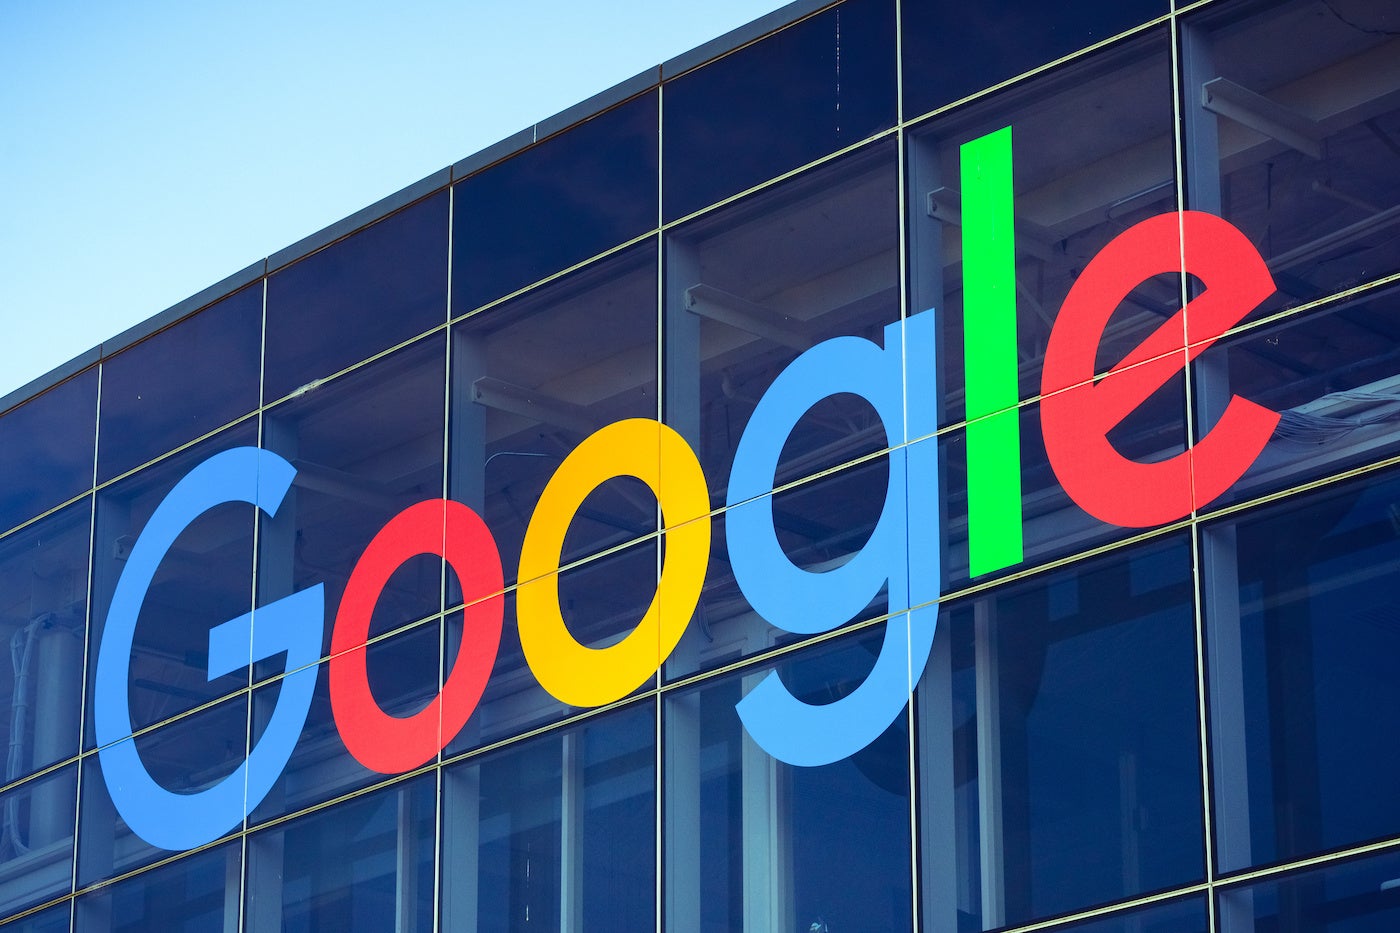 Google strikes to maintain public sector cybersecurity vulnerabilities leashed